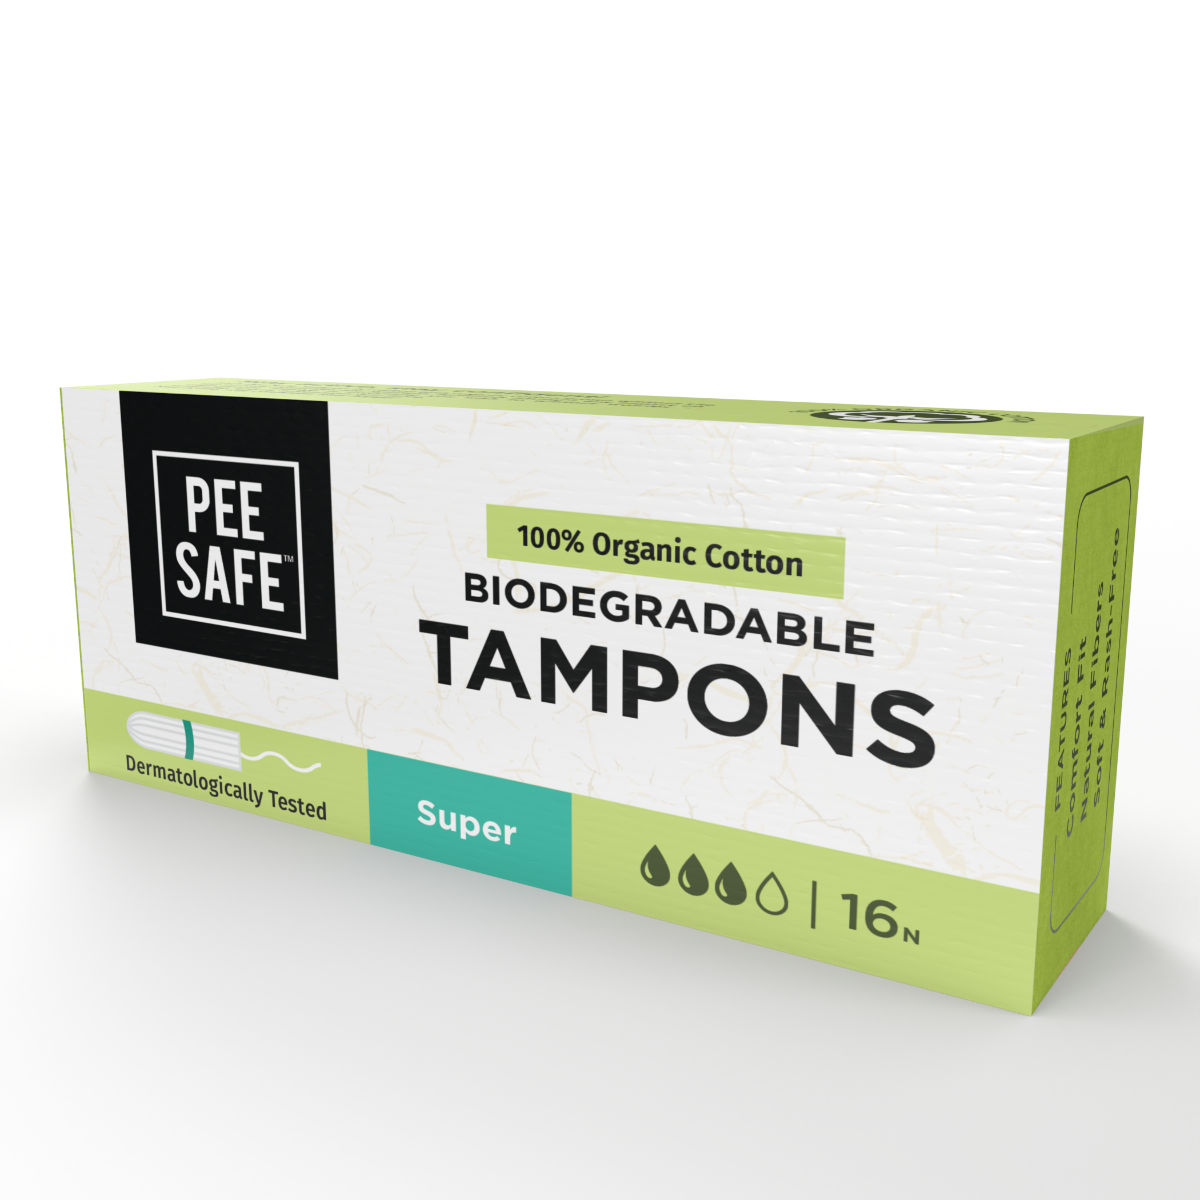 Buy Pee Safe 100% Organic Cotton Biodegradable Super Tampons, 16 Count Online